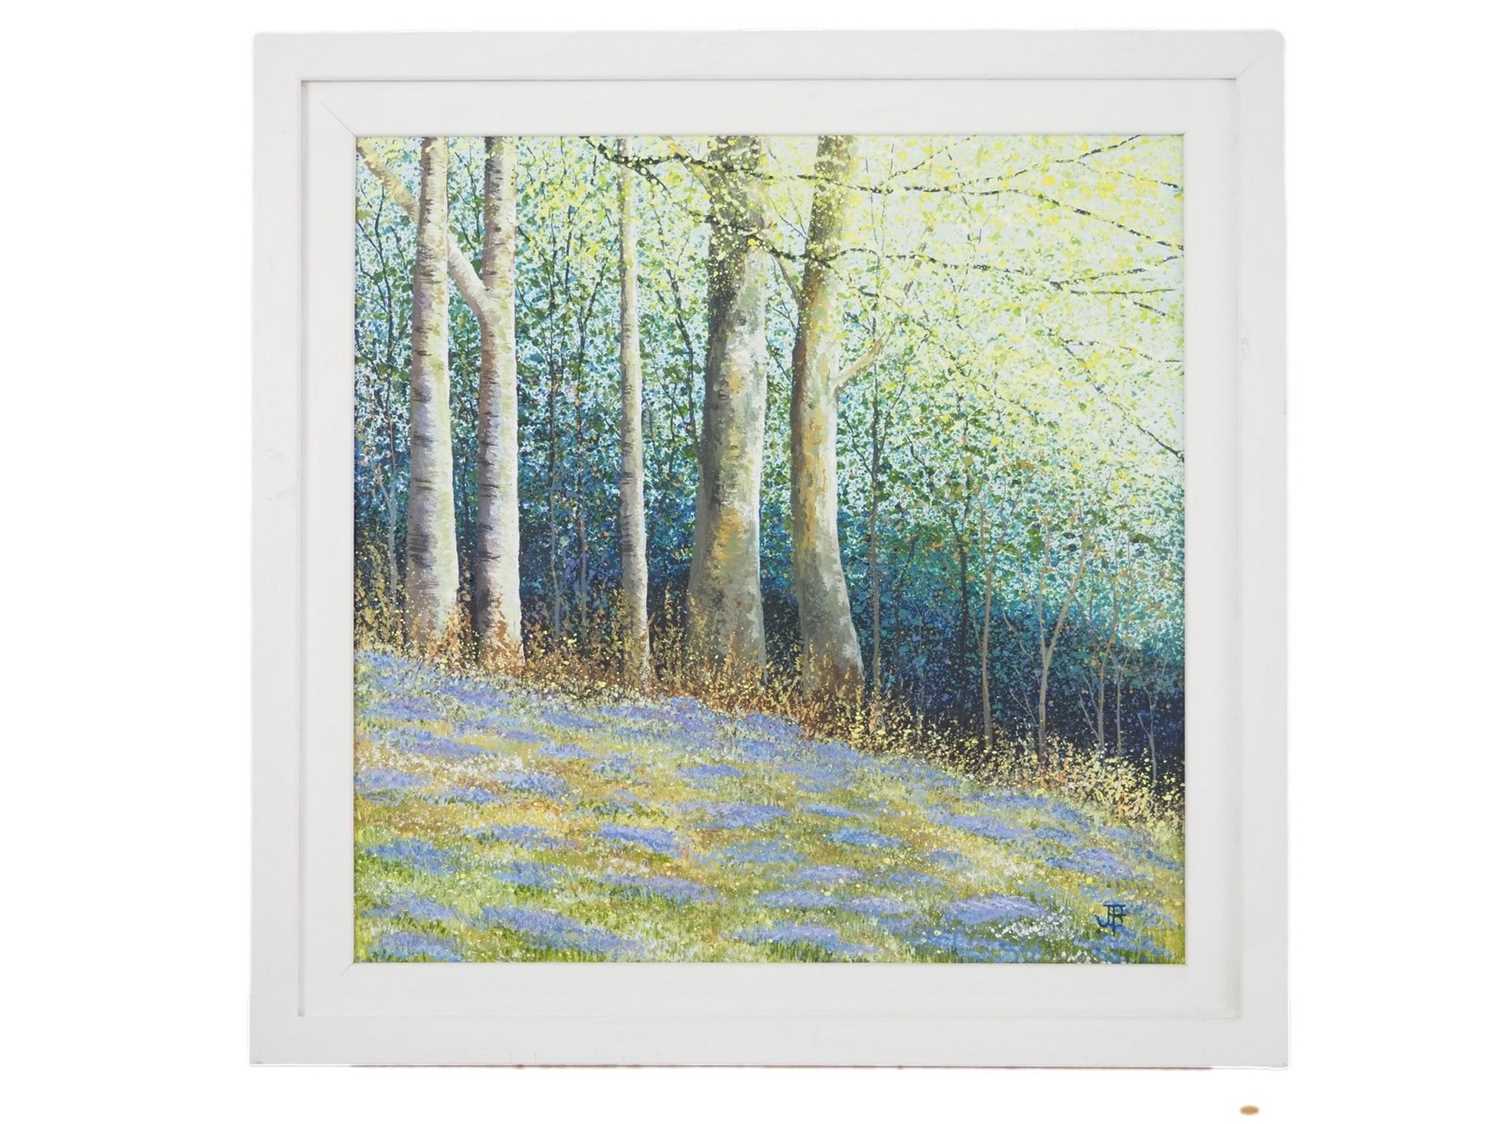 Brenda Farrell 'BIRCHES AND BLUEBELLS' - print on canvas - signed - 15.25" x 15.25" in a 19 " x